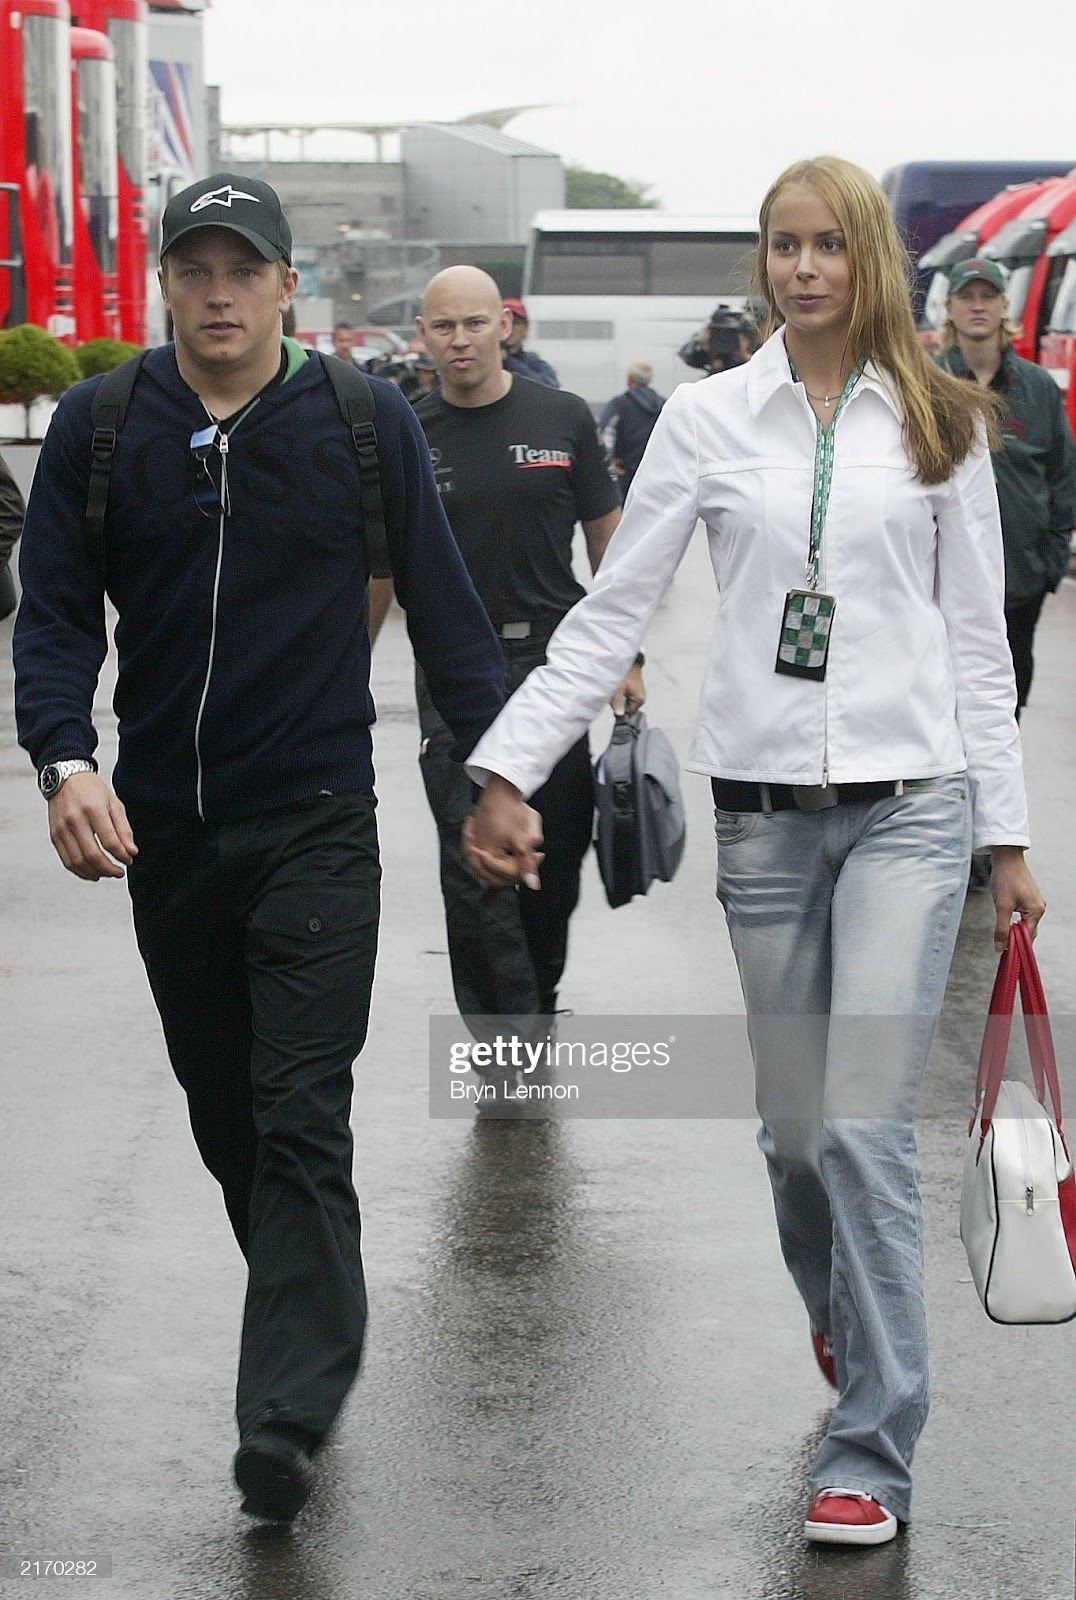 Kimi Raikkonen arrives in the paddock with his girlfriend, Jenni Dahlmann, prior to the Formula One British Grand Prix on July 17, 2003 at Silverstone in Northamptonshire, England.